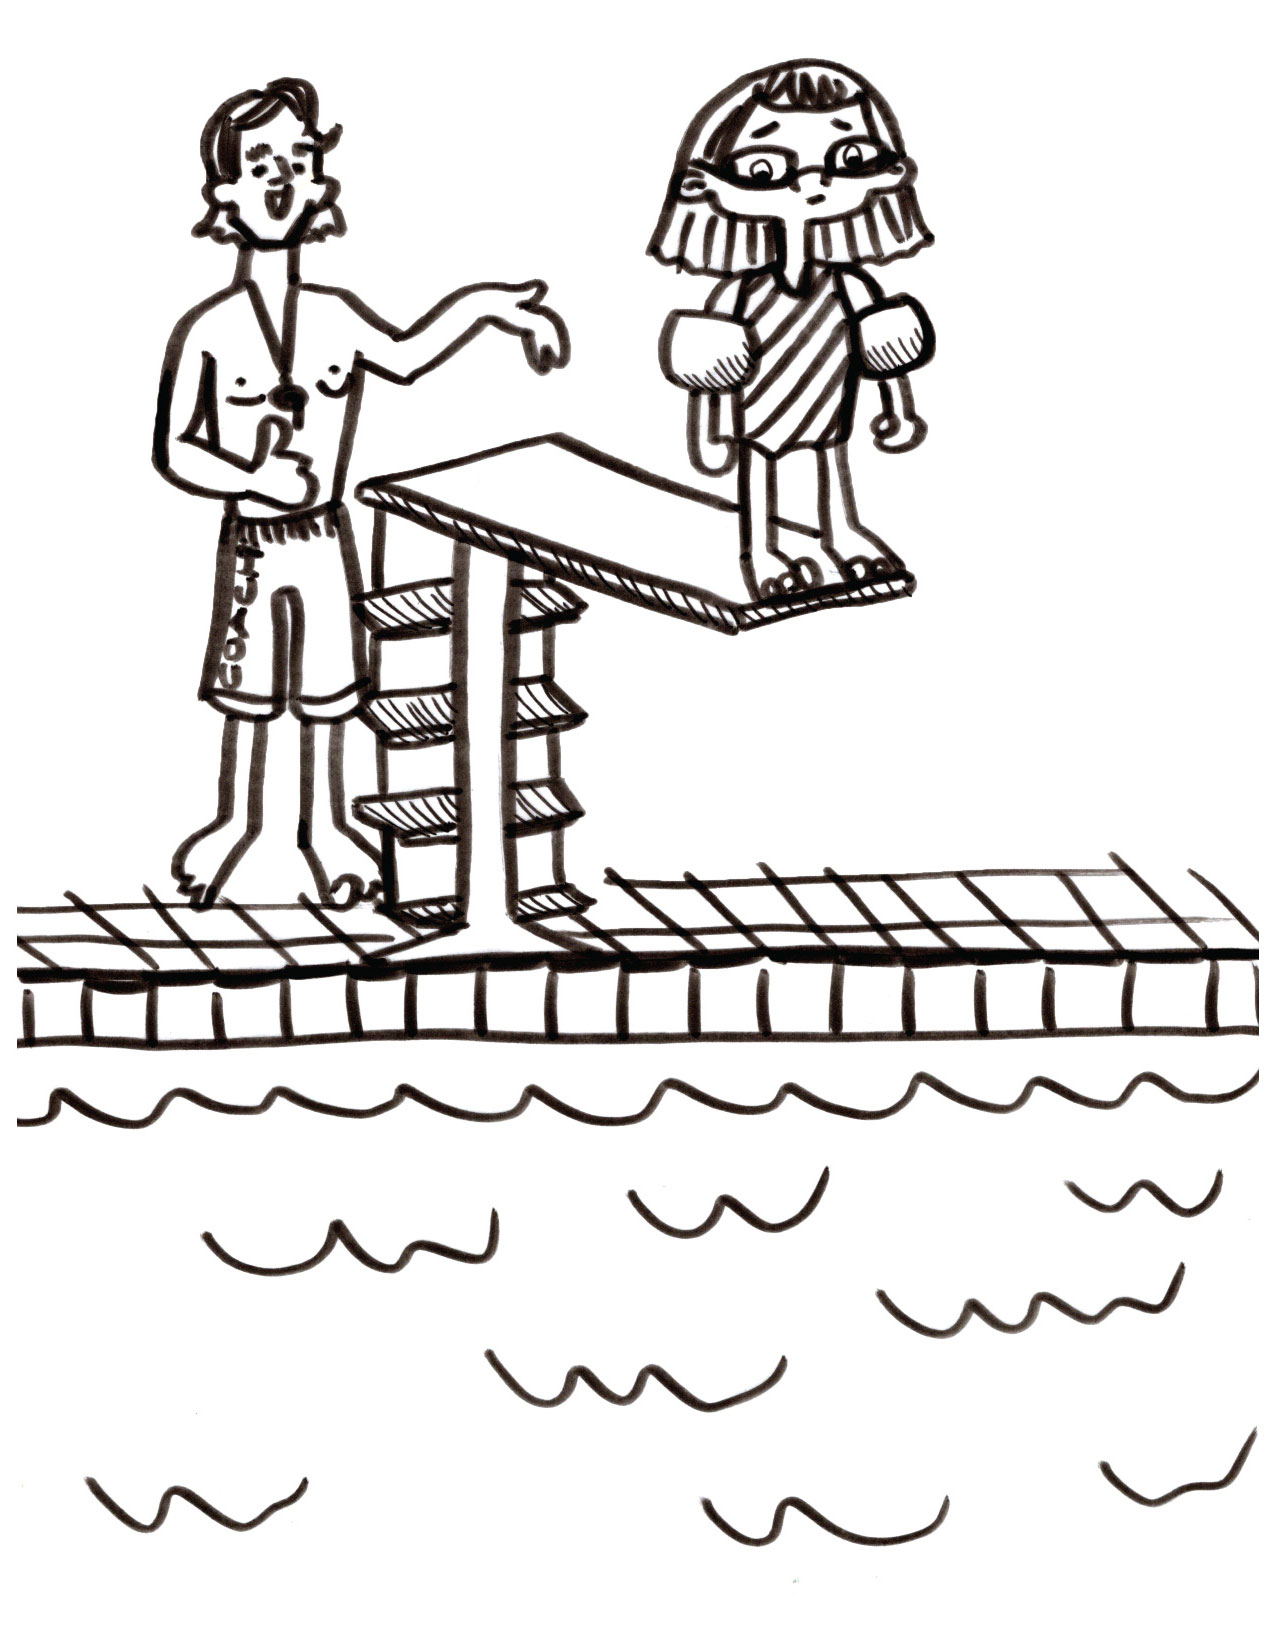 Little girl on a diving board with a coach